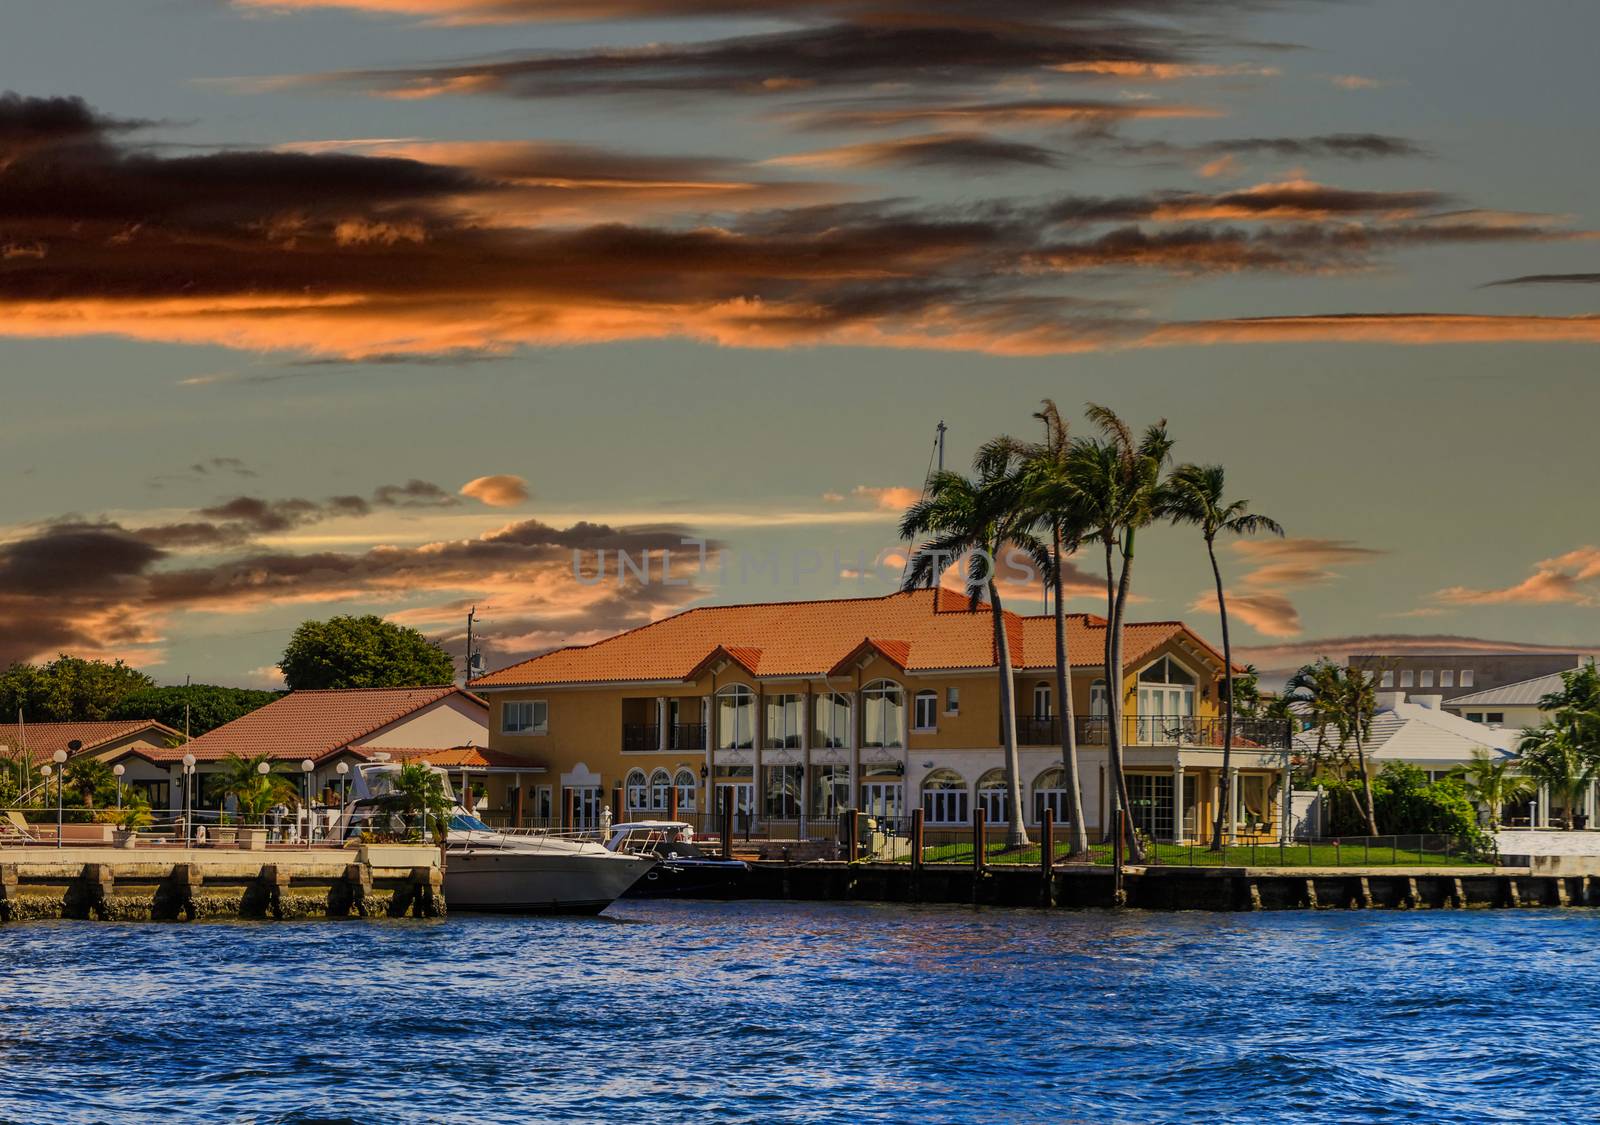 Large House in Fort Lauderdale at Sunset by dbvirago